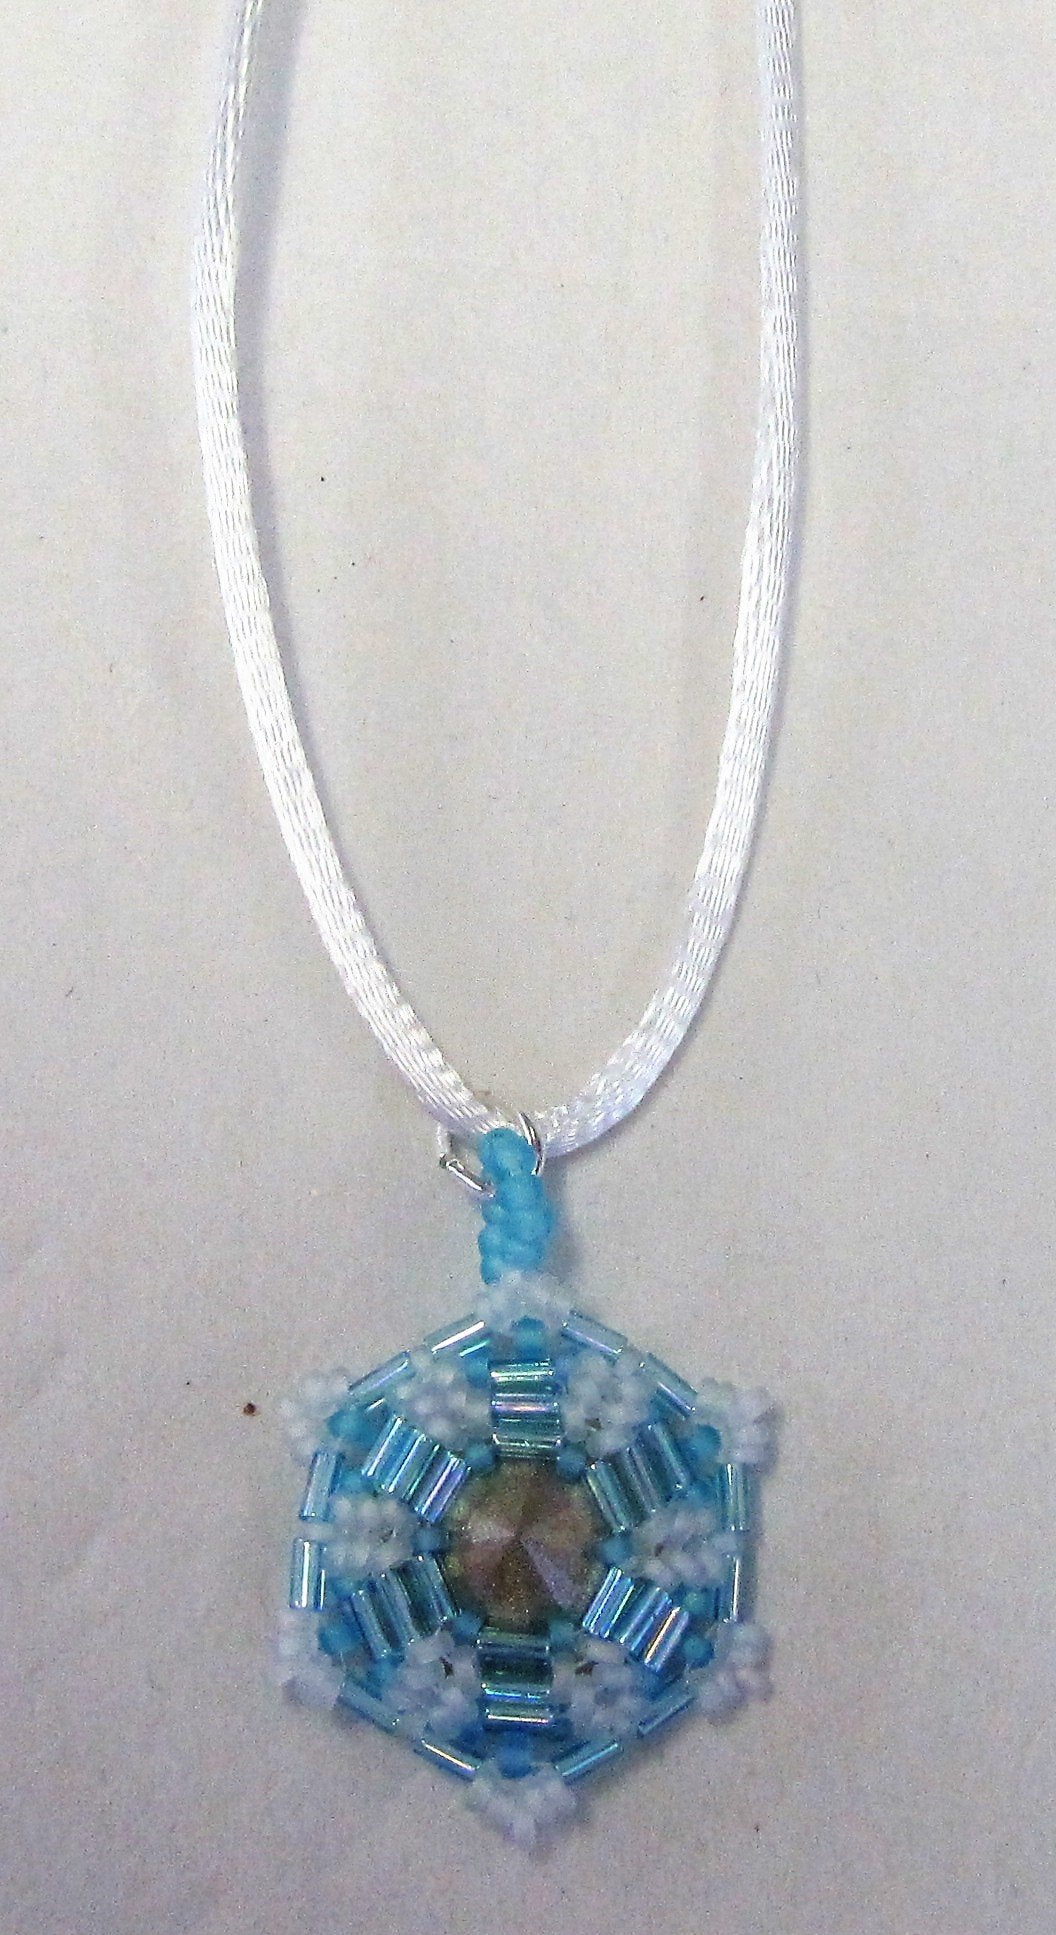 Handcrafted blue beaded pendant on white cord necklace